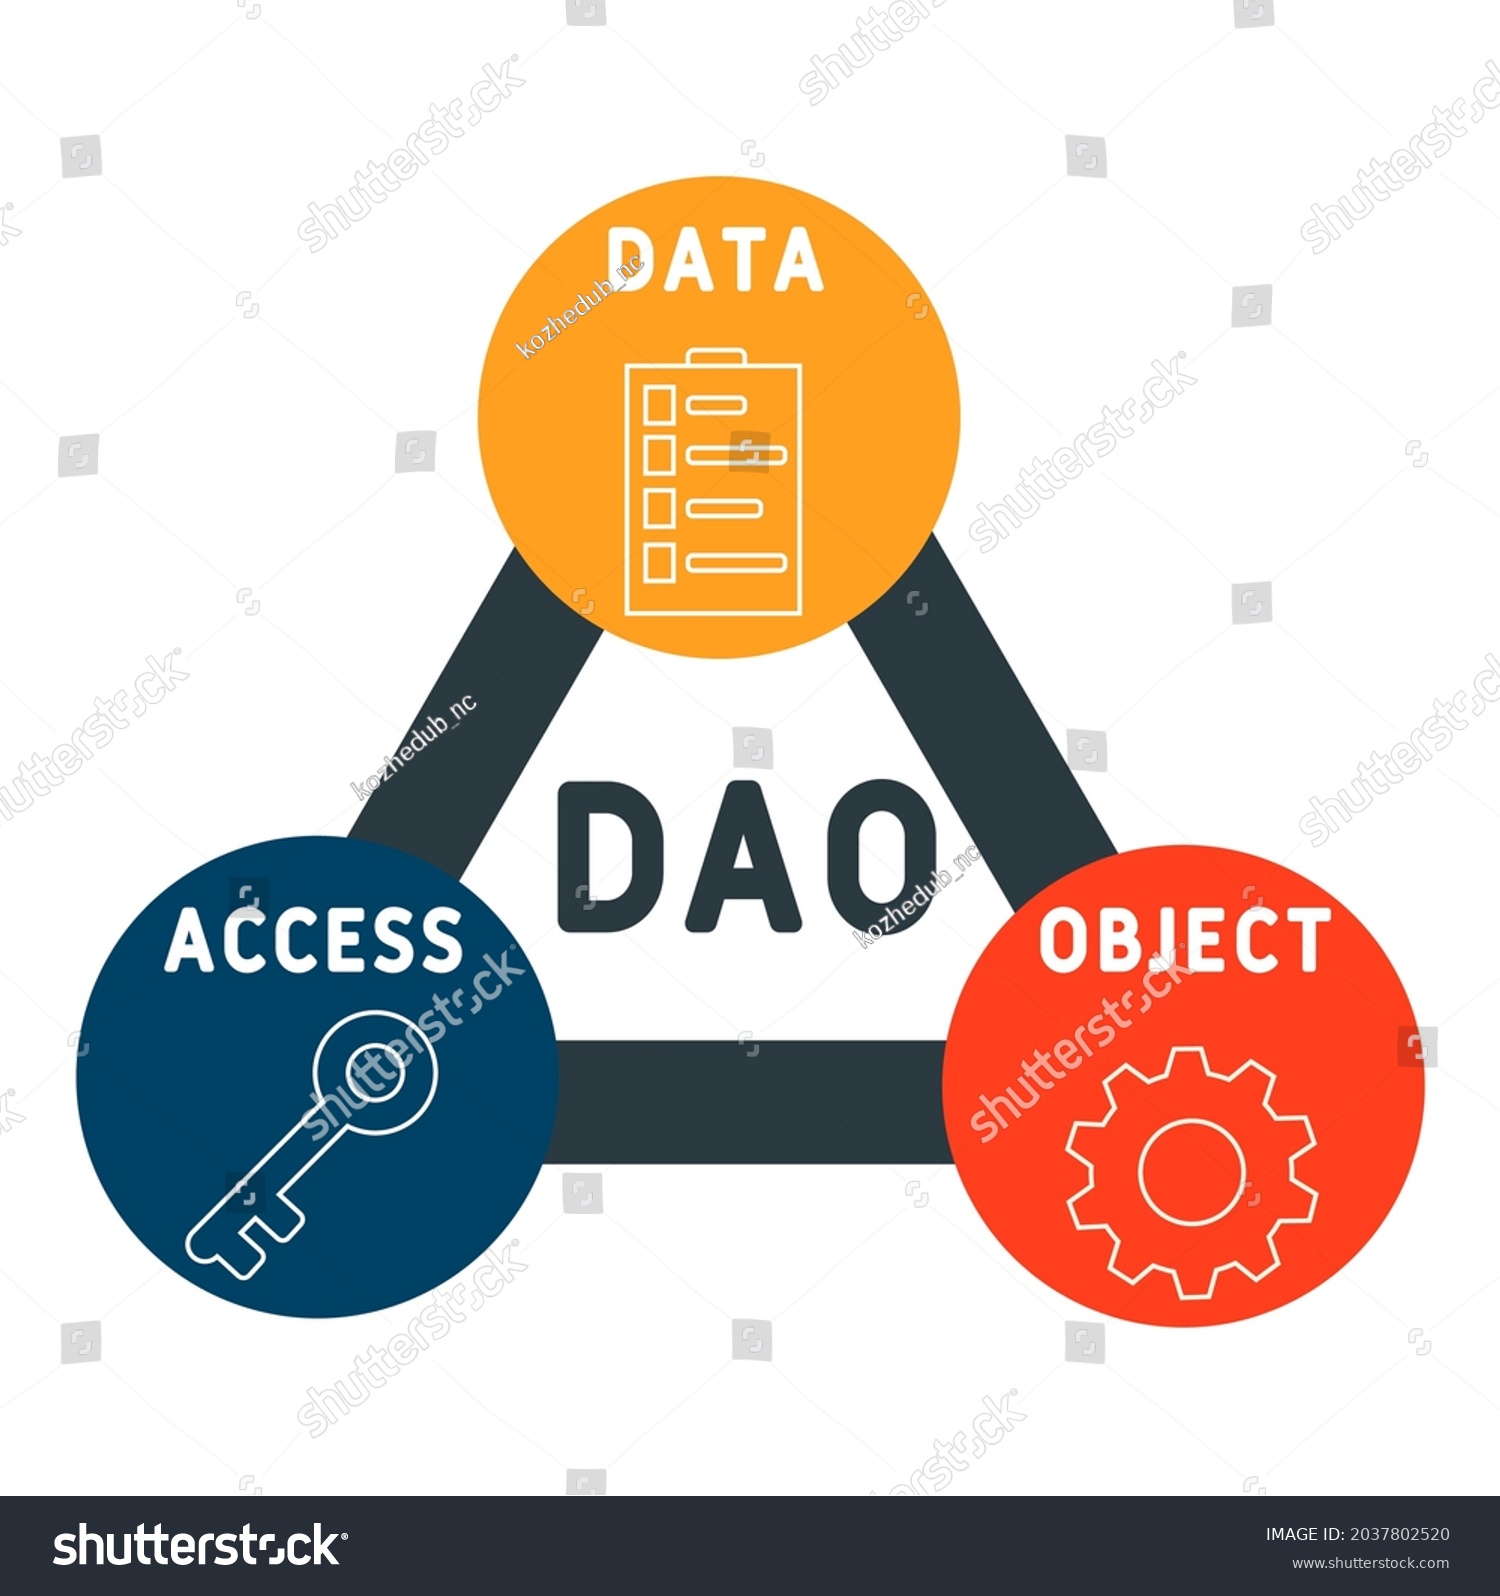 SVG of DAO - Data Access Object acronym. business concept background.  vector illustration concept with keywords and icons. lettering illustration with icons for web banner, flyer, landing  svg